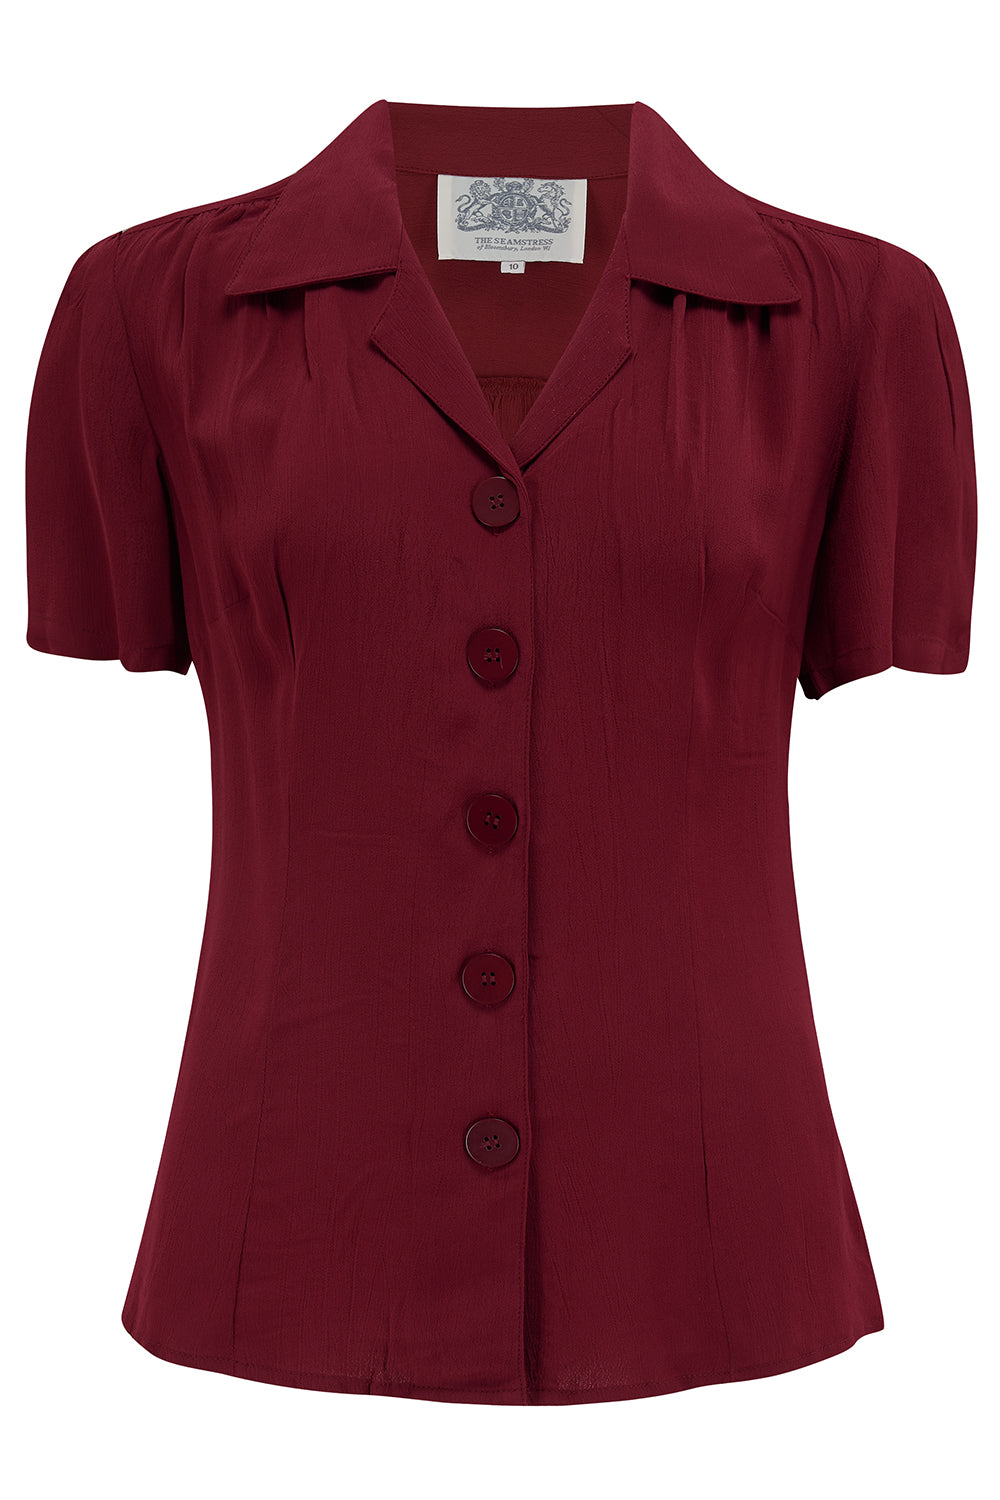 "Grace" Blouse in Wine, Authentic & Classic 1940s Vintage Style - CC41, Goodwood Revival, Twinwood Festival, Viva Las Vegas Rockabilly Weekend Rock n Romance The Seamstress Of Bloomsbury